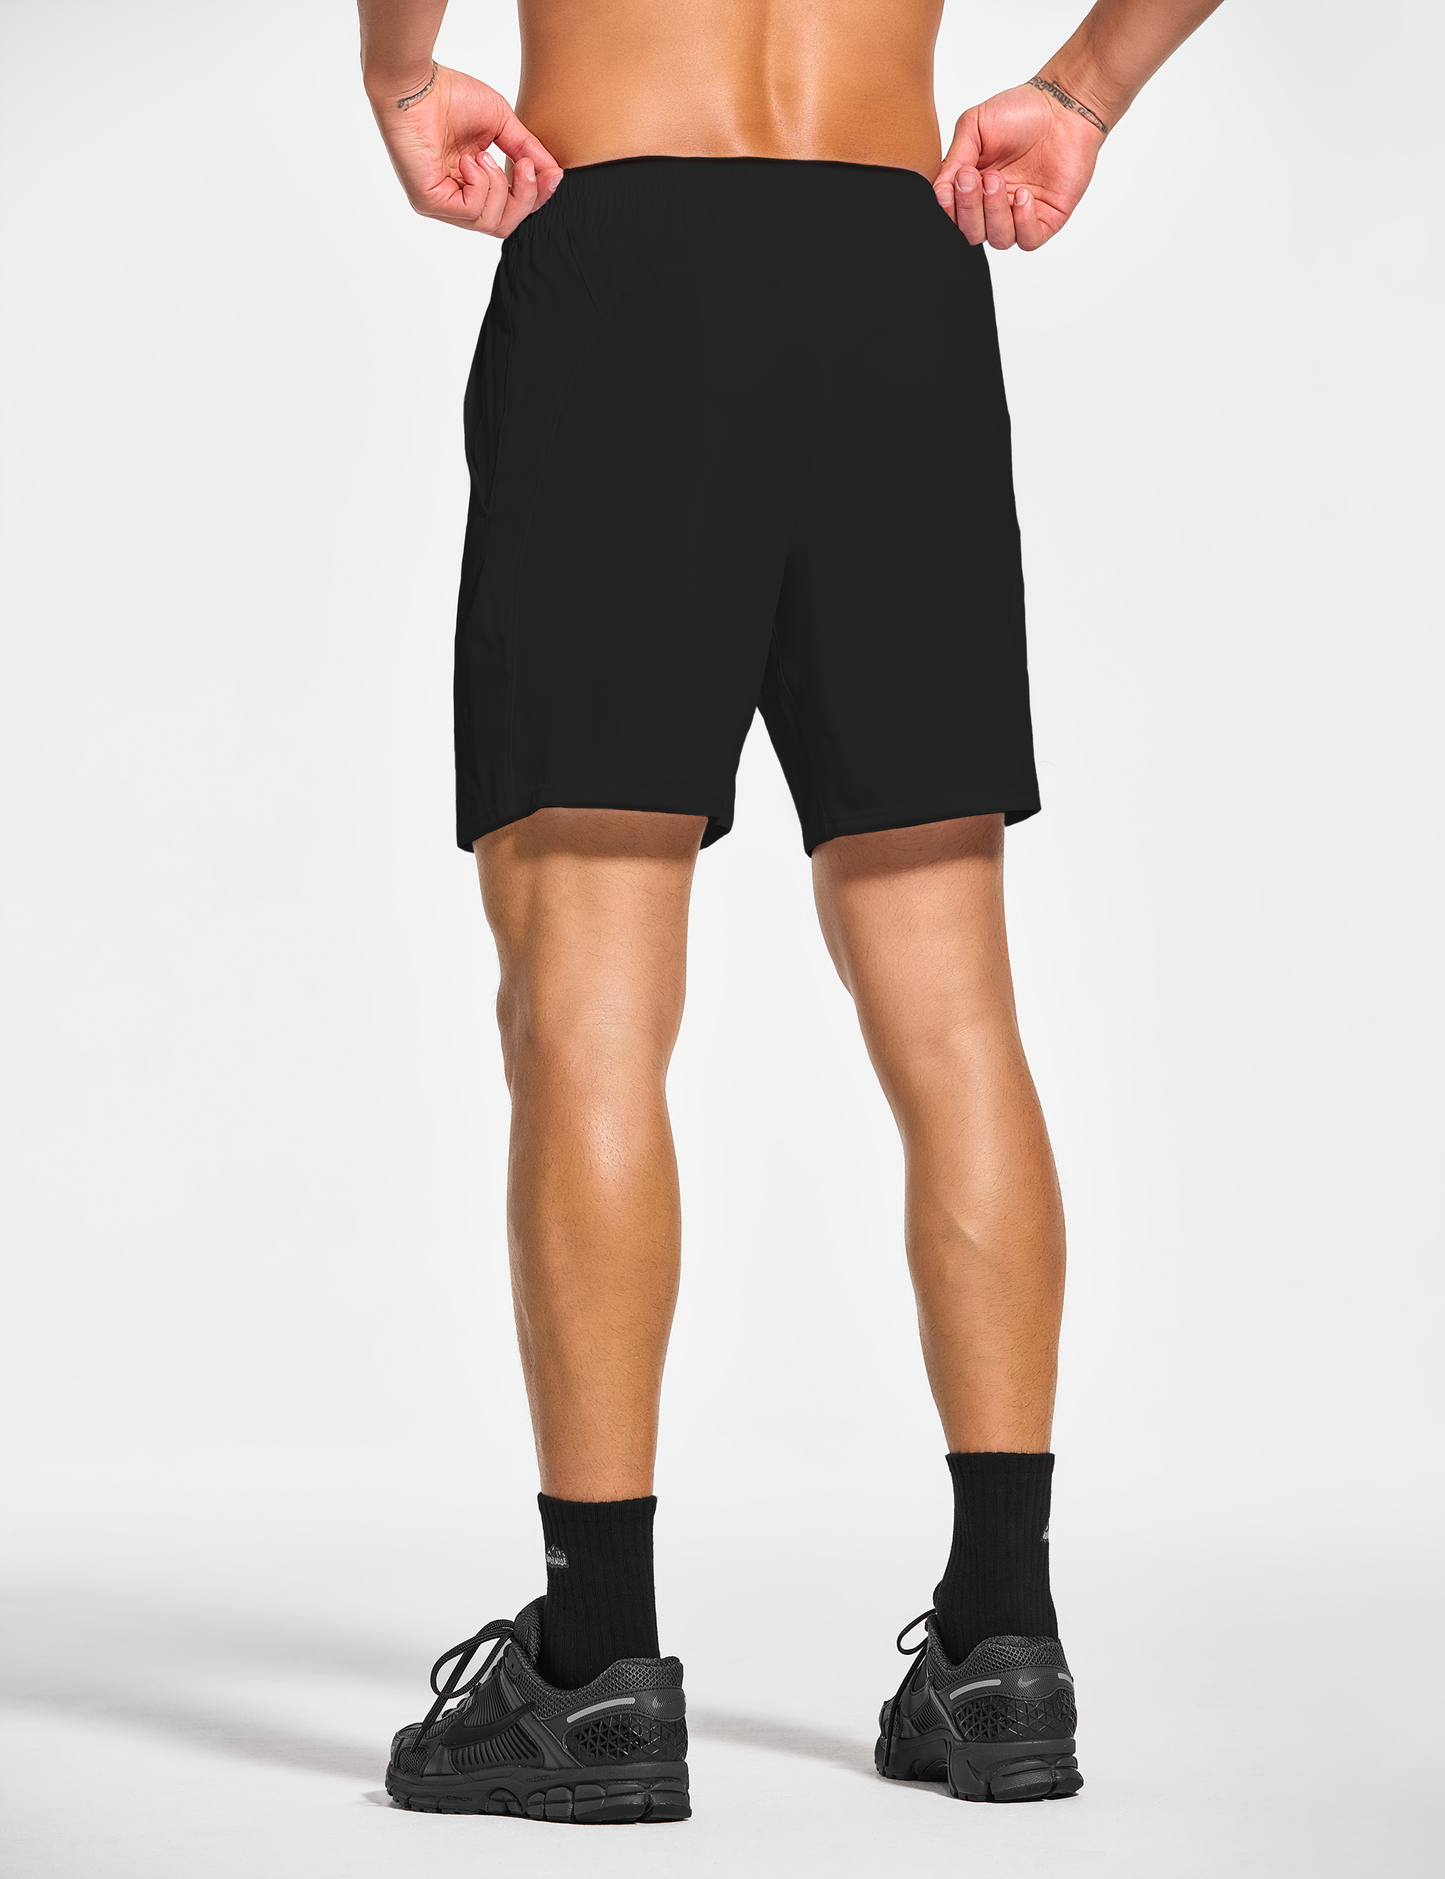 mens 7 inch lined workout running tennis gym shorts with pockets black